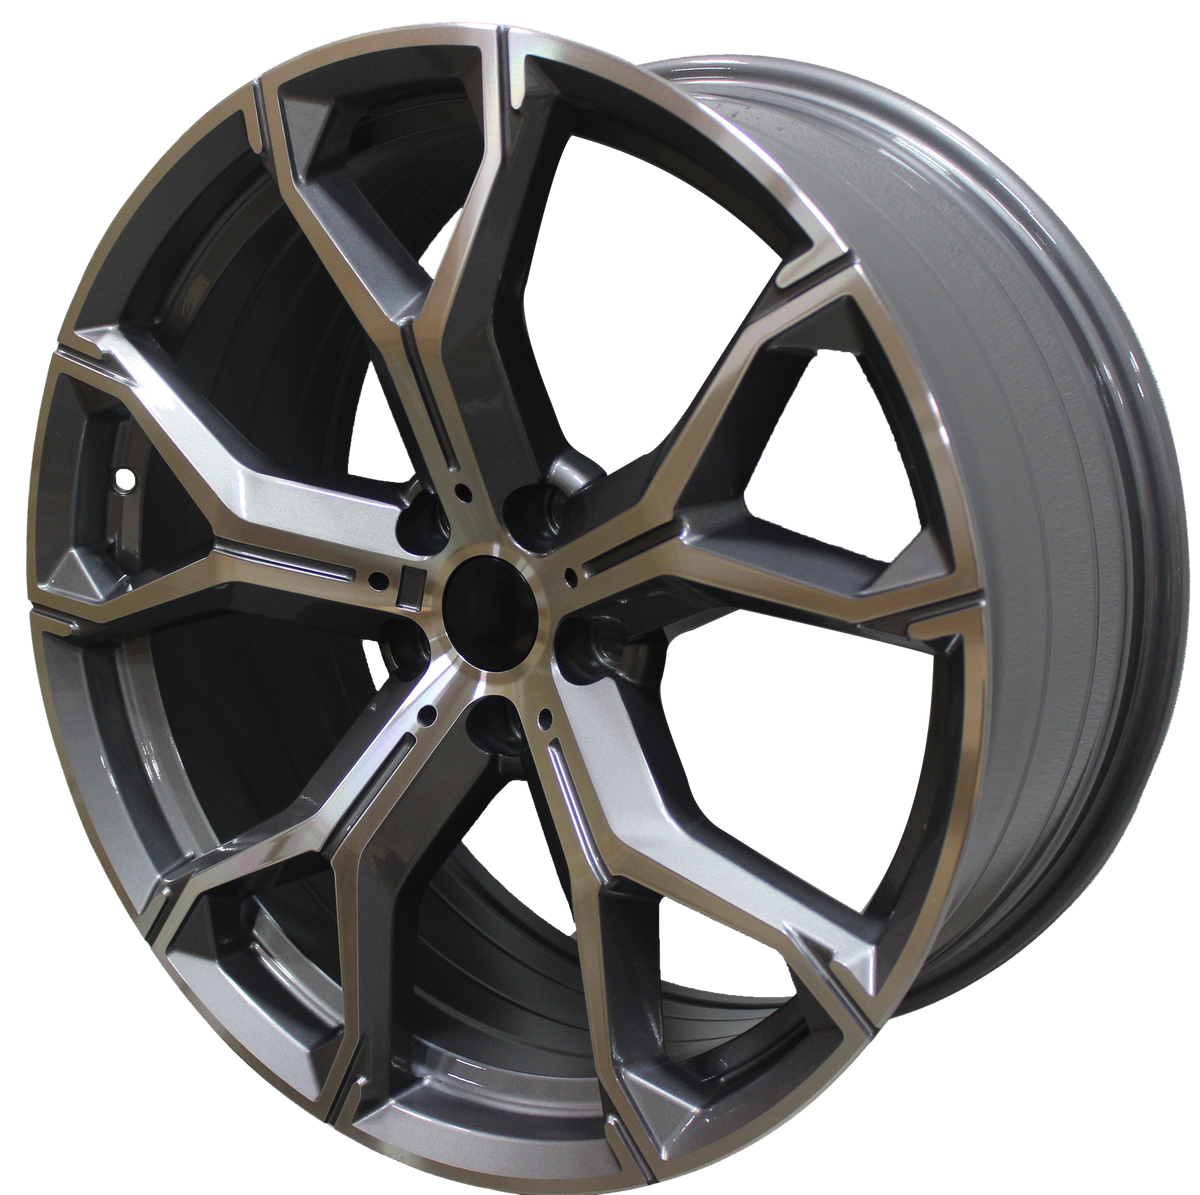 20 Inch Rims Fits BMW X6 X5 X4 Style Staggered Wheels